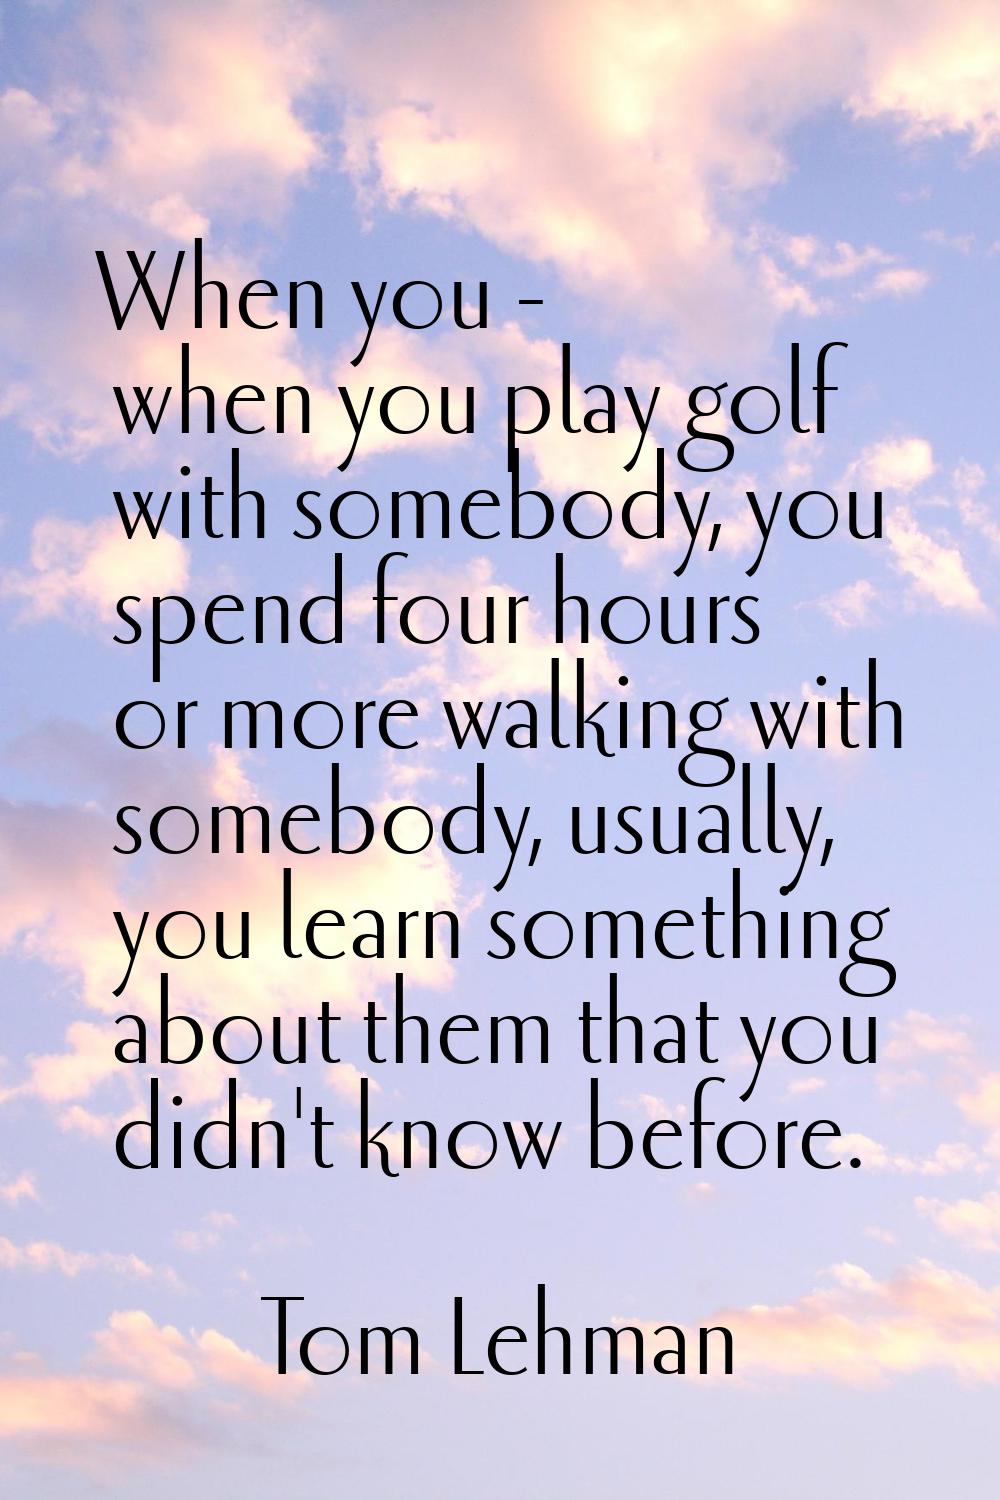 When you - when you play golf with somebody, you spend four hours or more walking with somebody, us